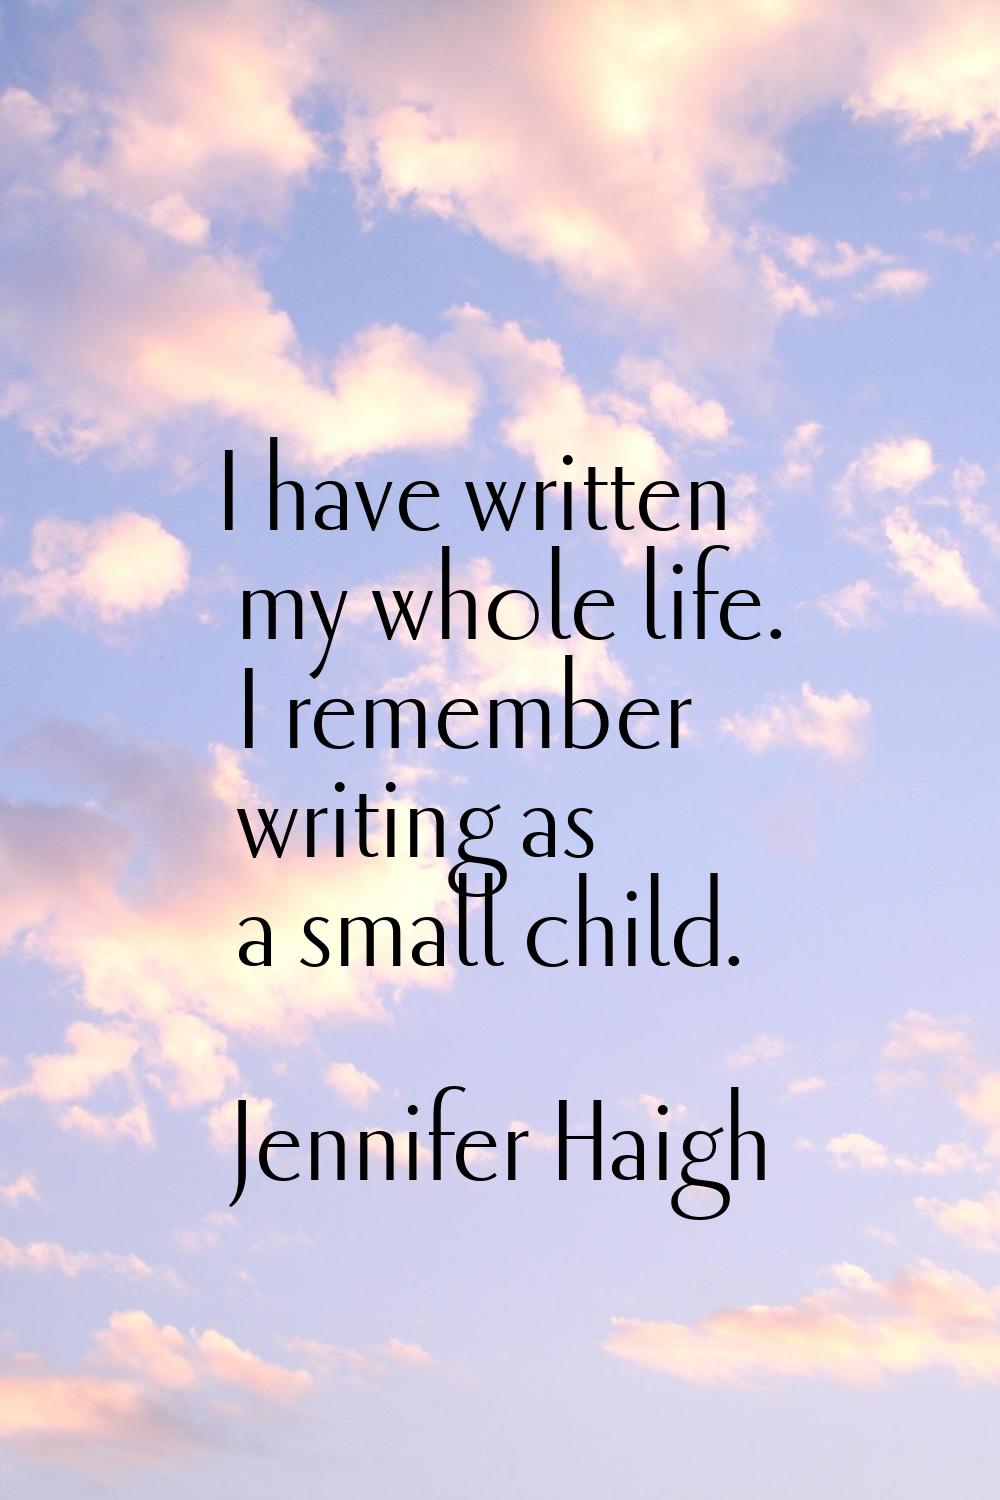 I have written my whole life. I remember writing as a small child.